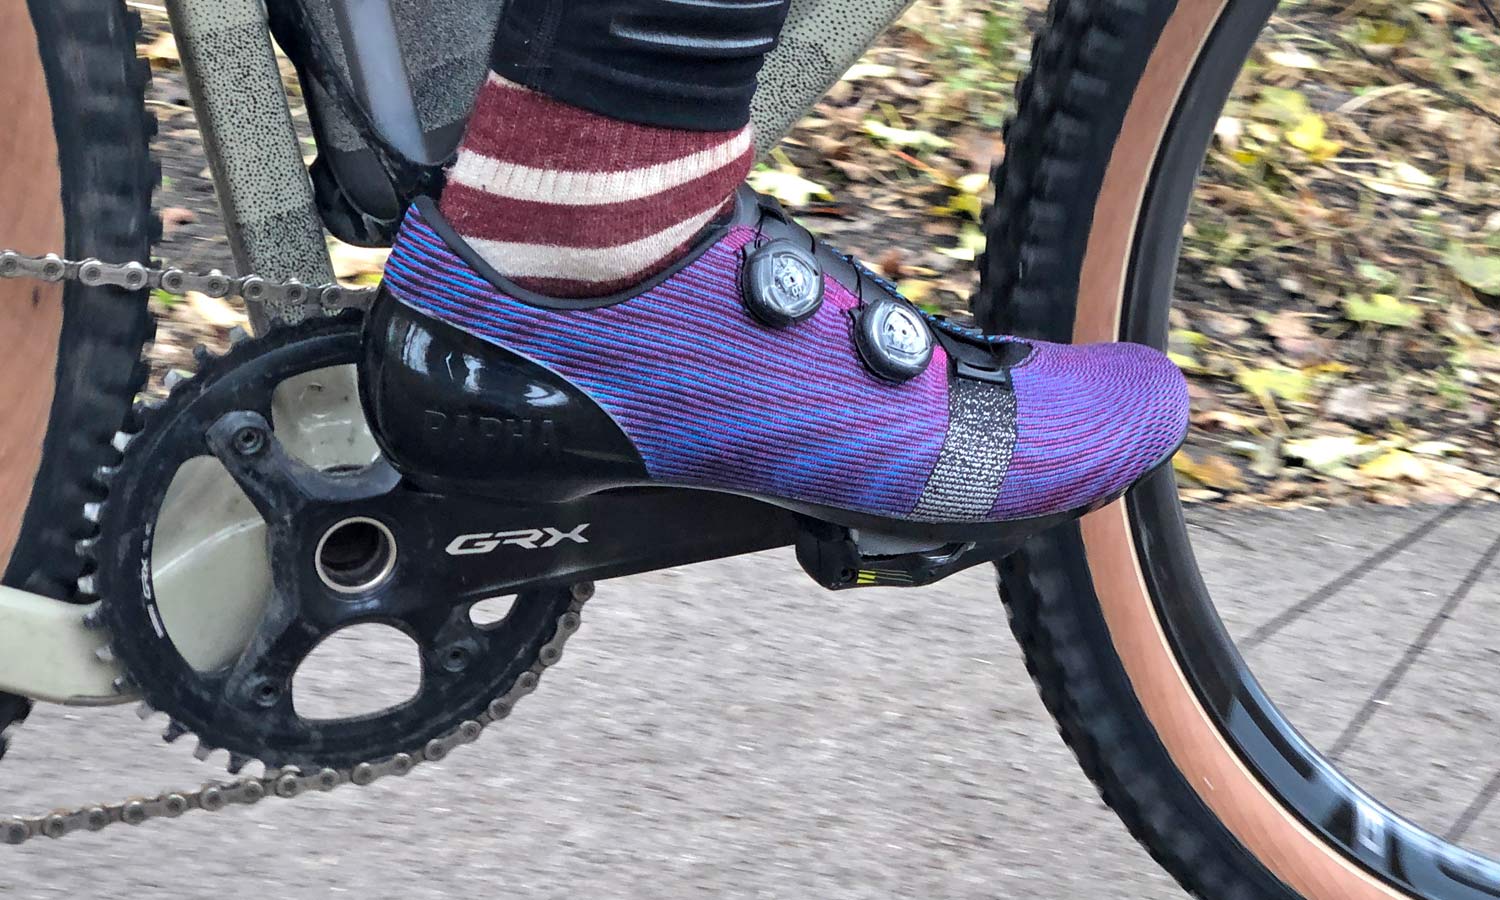 Riding the Rapha Pro Team Powerweave woven synthetic Boa dial IP1 full carbon road bike shoes